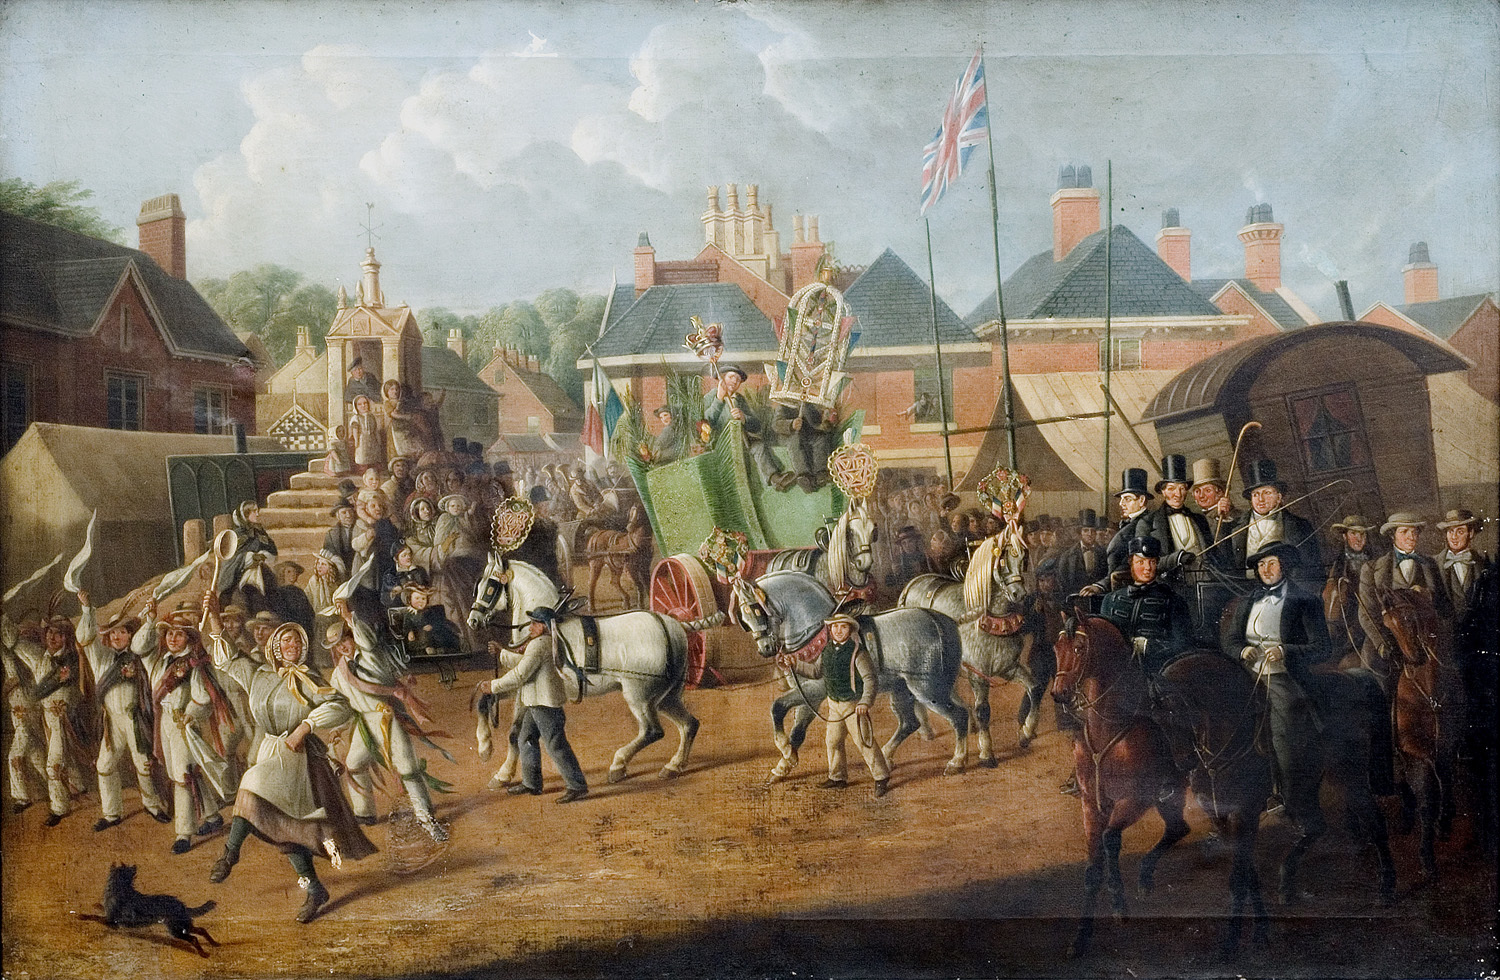 A painting of the Lymm Dance and Rushbearing from 1840